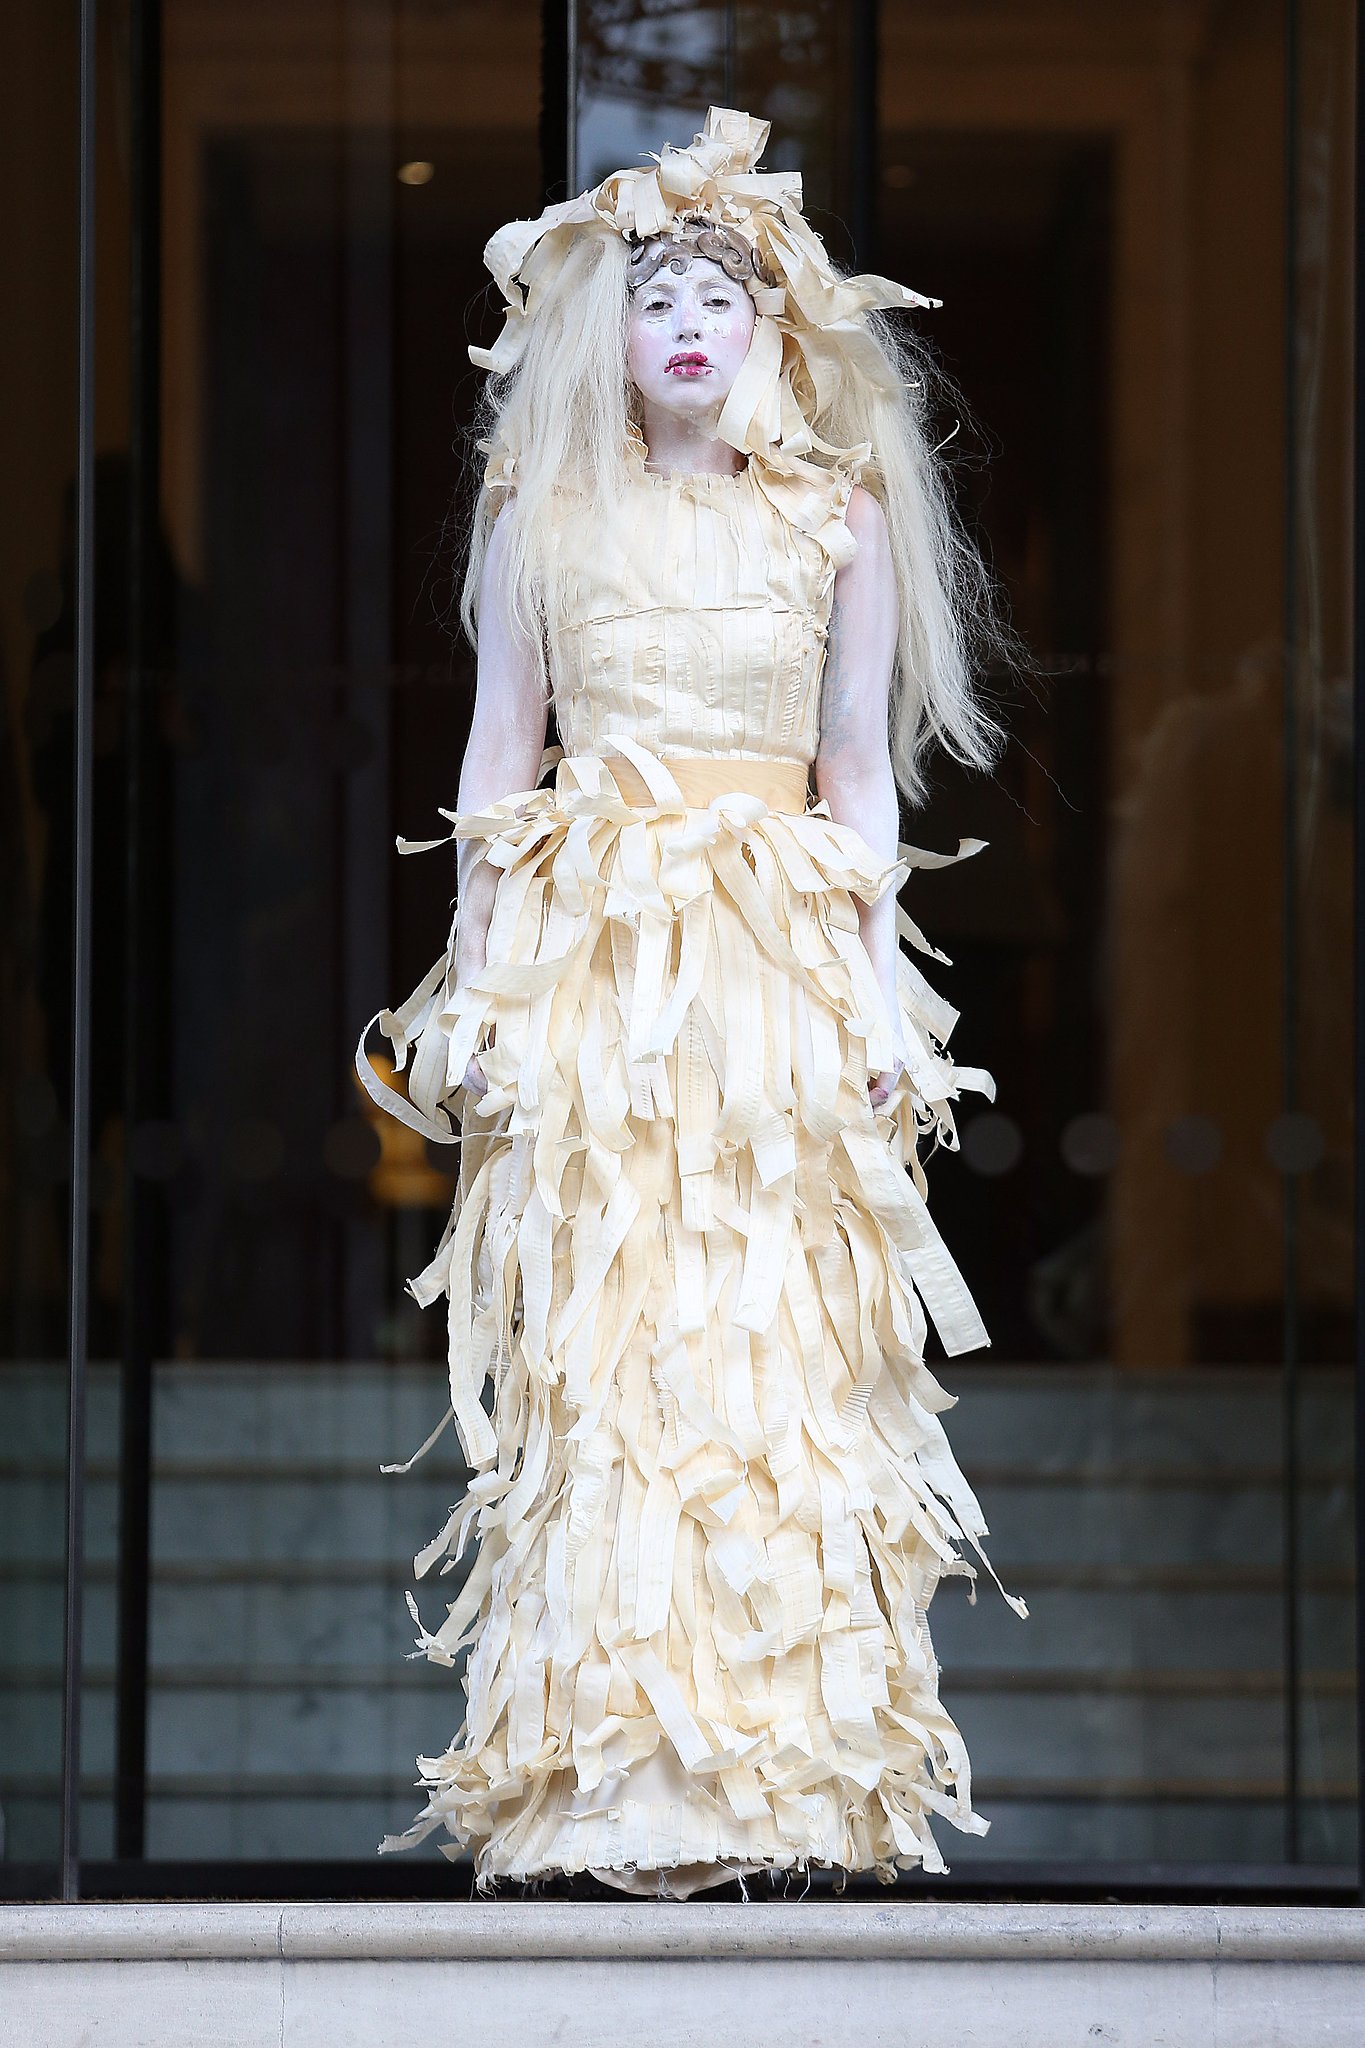 Lady Gaga in Shredded Dress in London in 2013 | Applause, Applause ...